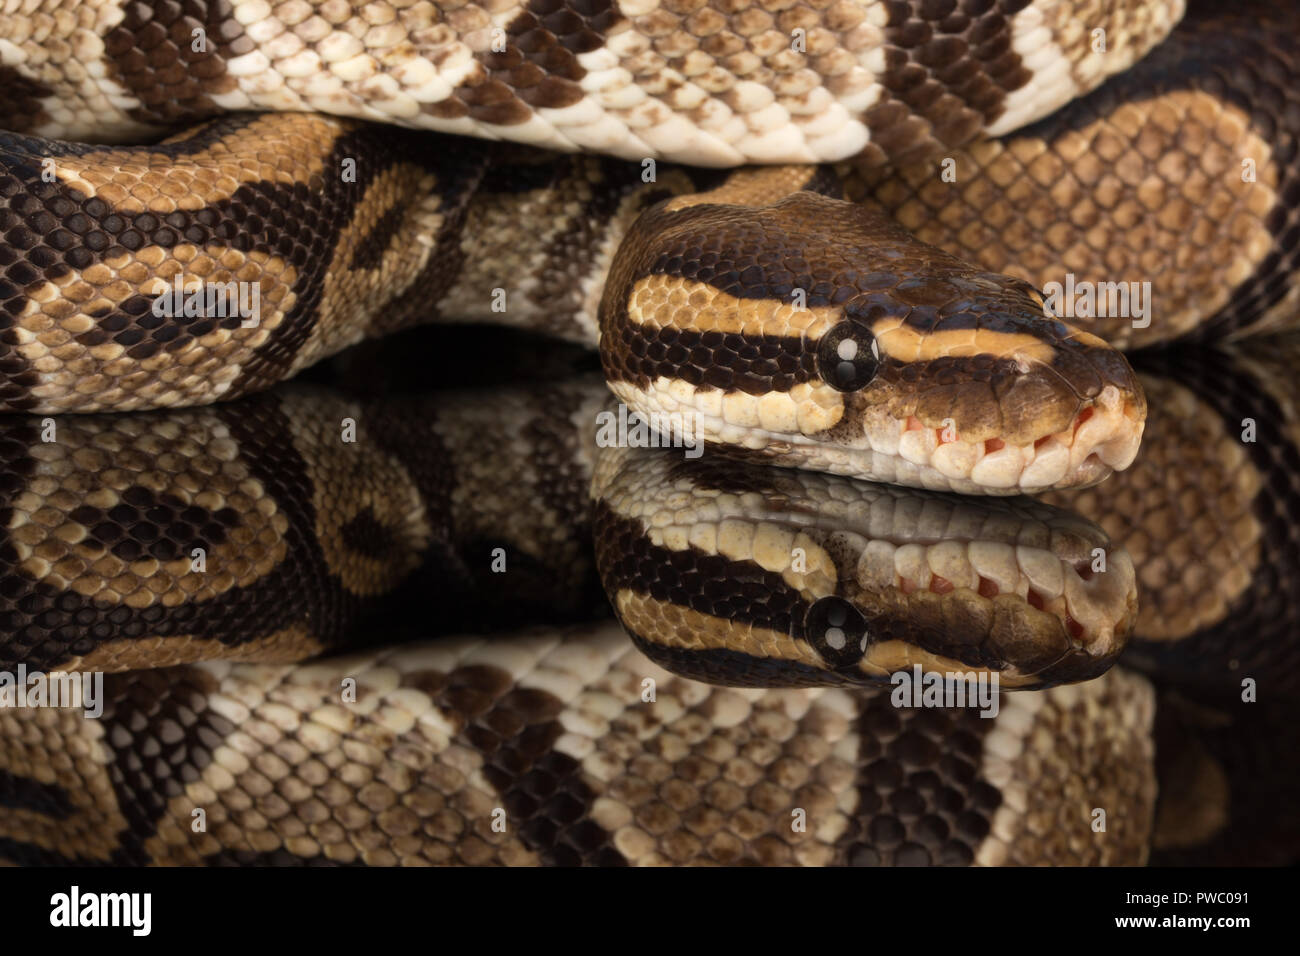 Royal python, also called the ball python (Python regius), an African reptile snake species Stock Photo